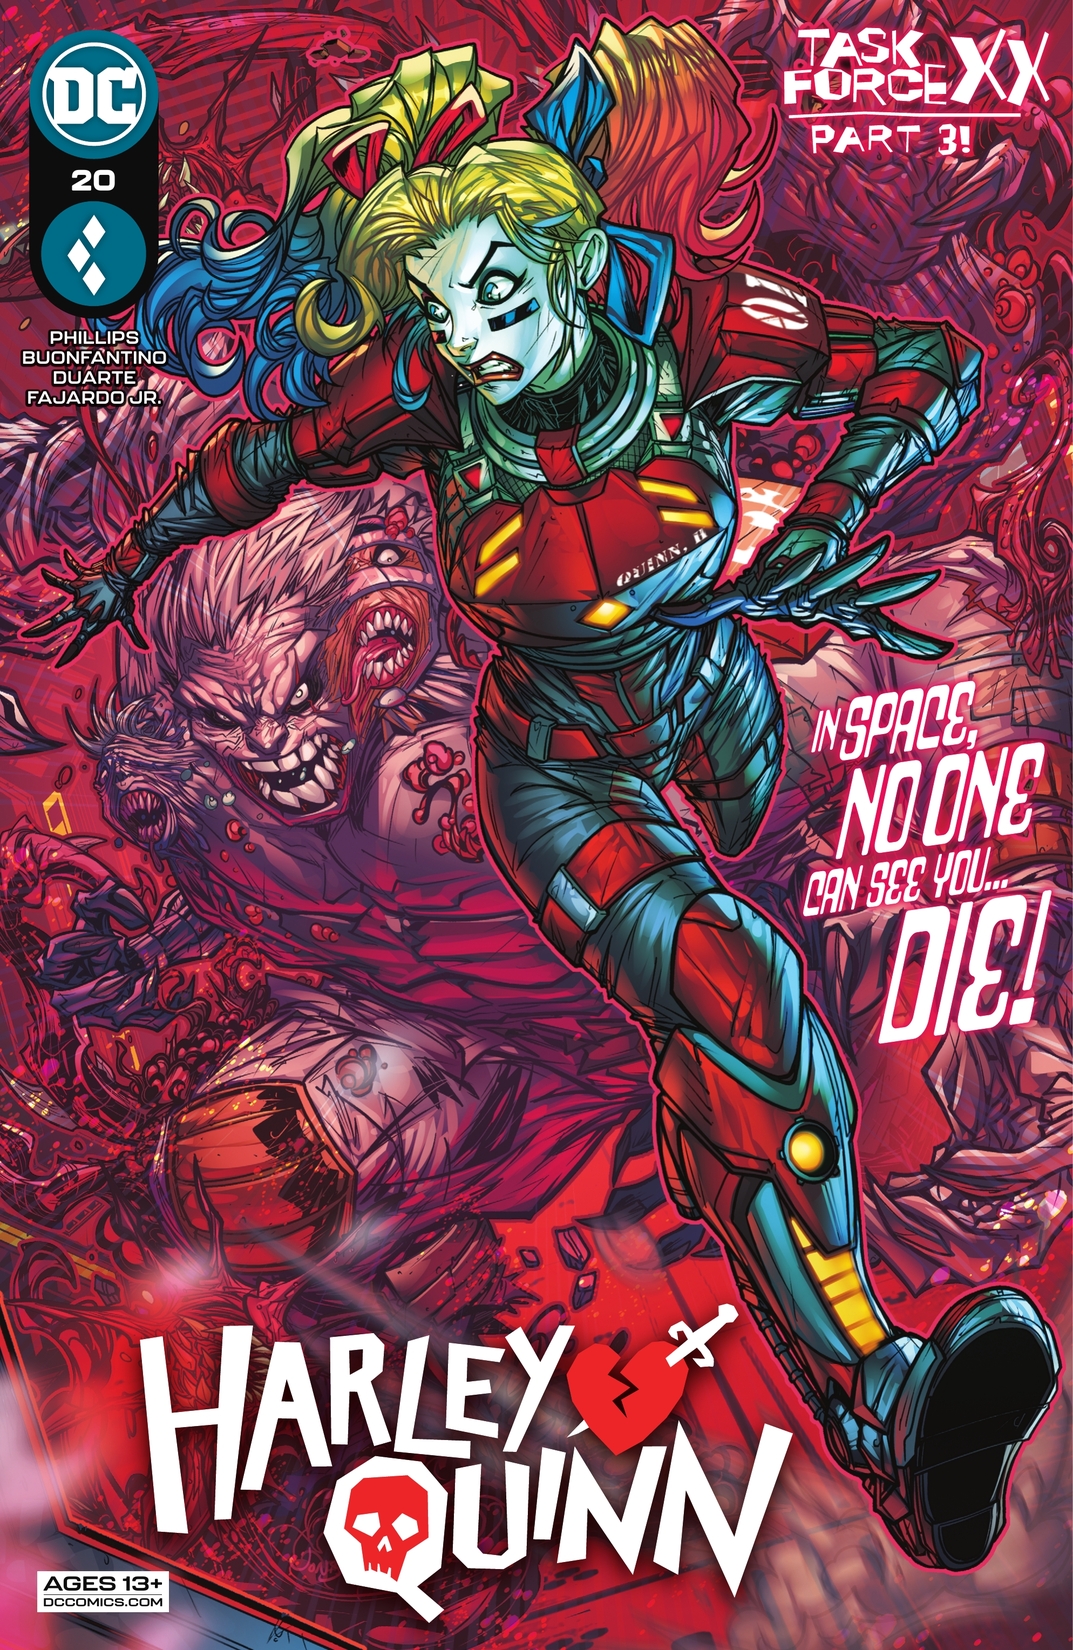 Harley Quinn #20 preview images